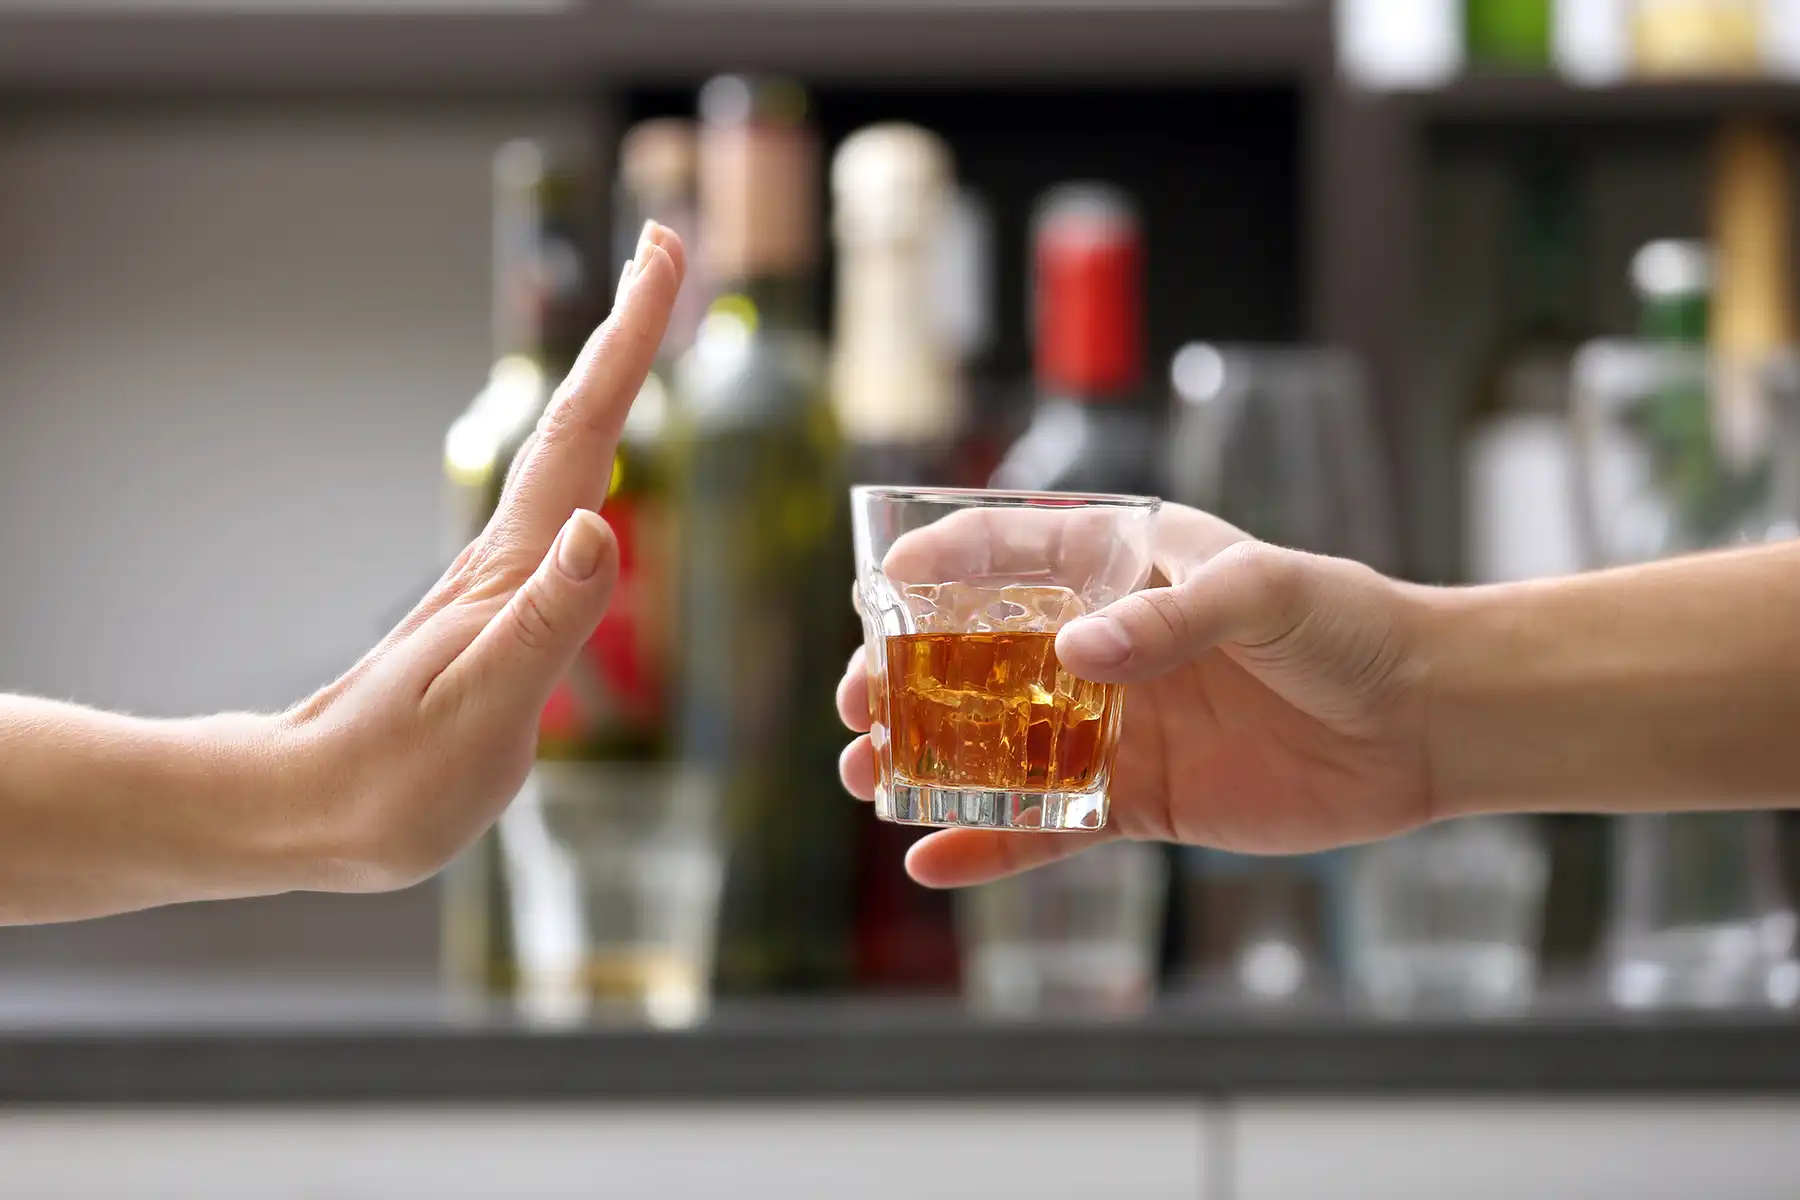 One hand extending a glass of whiskey, another hand extended signaling 